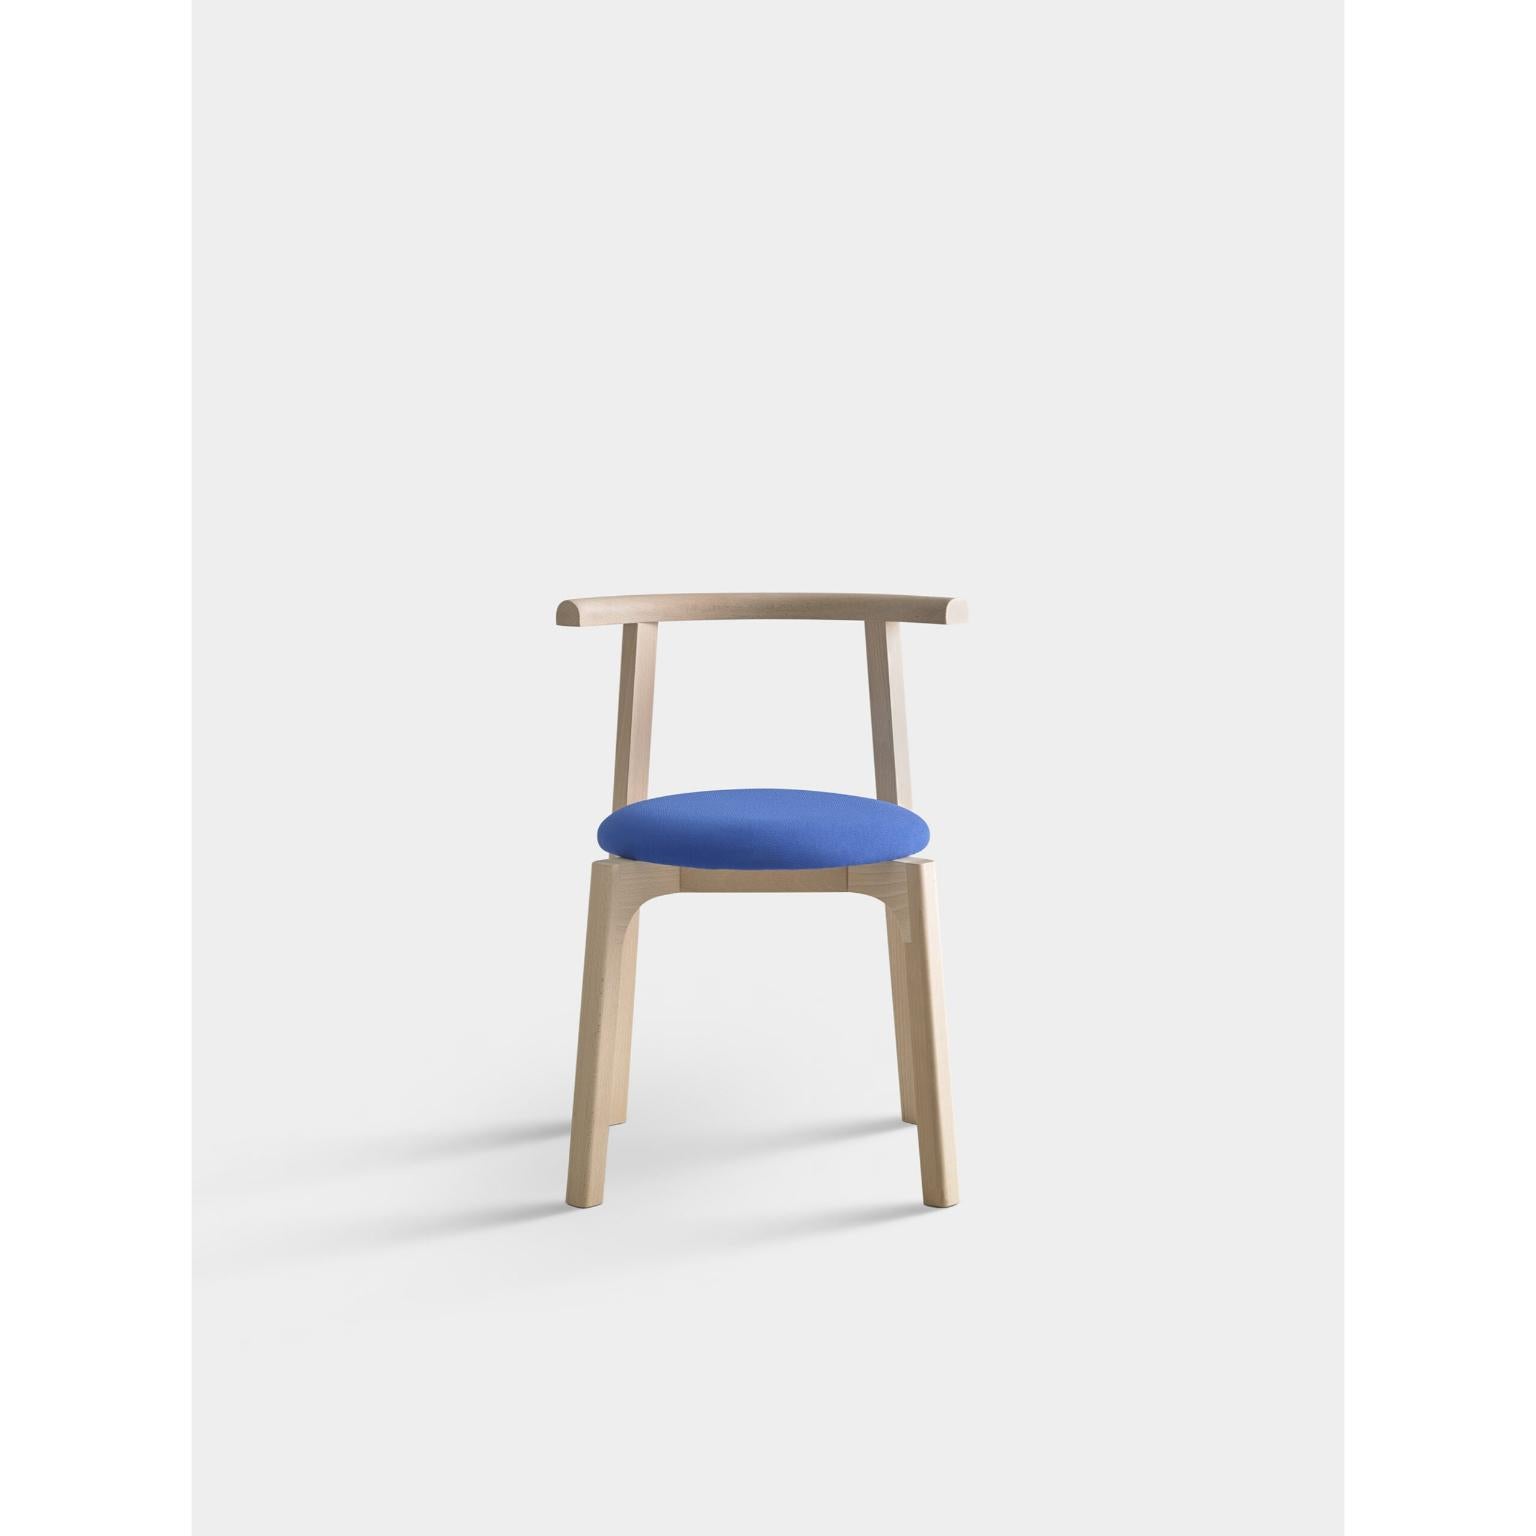 Carlo beechwood chair by Pepe Albargues
Dimensions: W 55 x D 51 x H 73 cm 
Materials: Beechwood structure, foam CMHR.

Variations of materials are avaliable
Carlo is a chair in which the straight and curved lines show a perfect harmony to get a